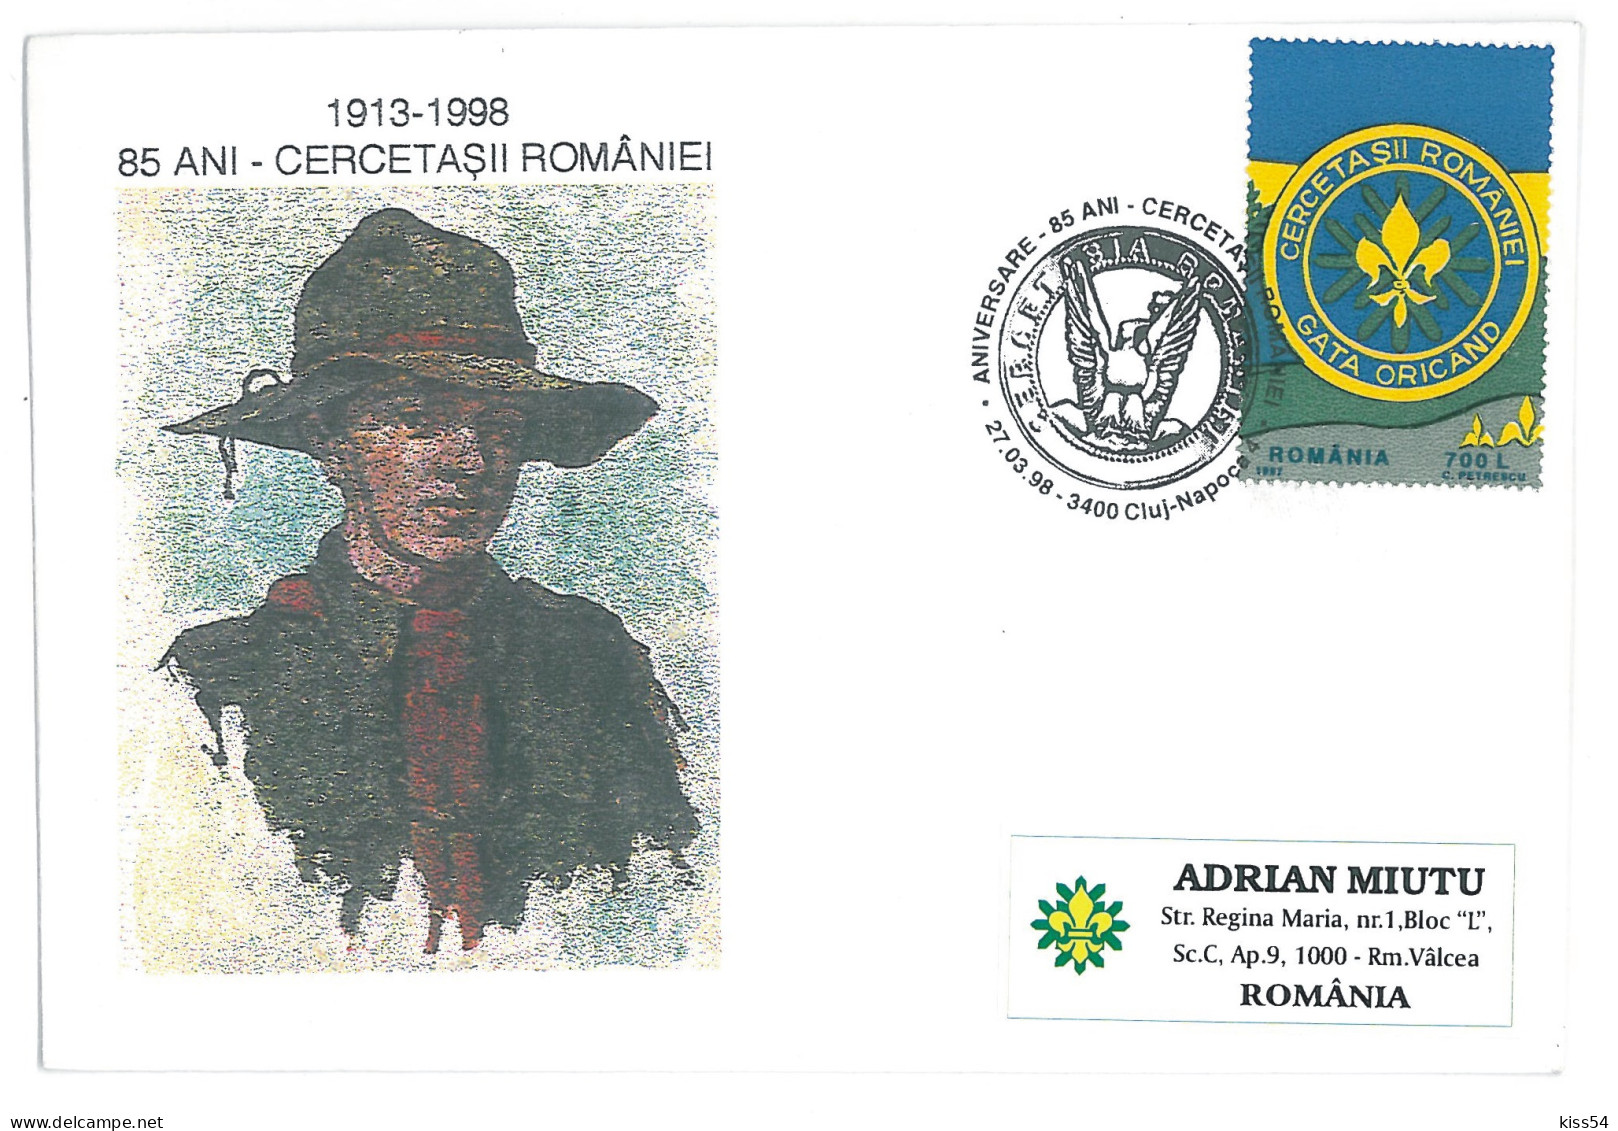 SC 48 - 1211 ROMANIA, Scout, Special Stamp - Cover - Used - 1998 - Covers & Documents